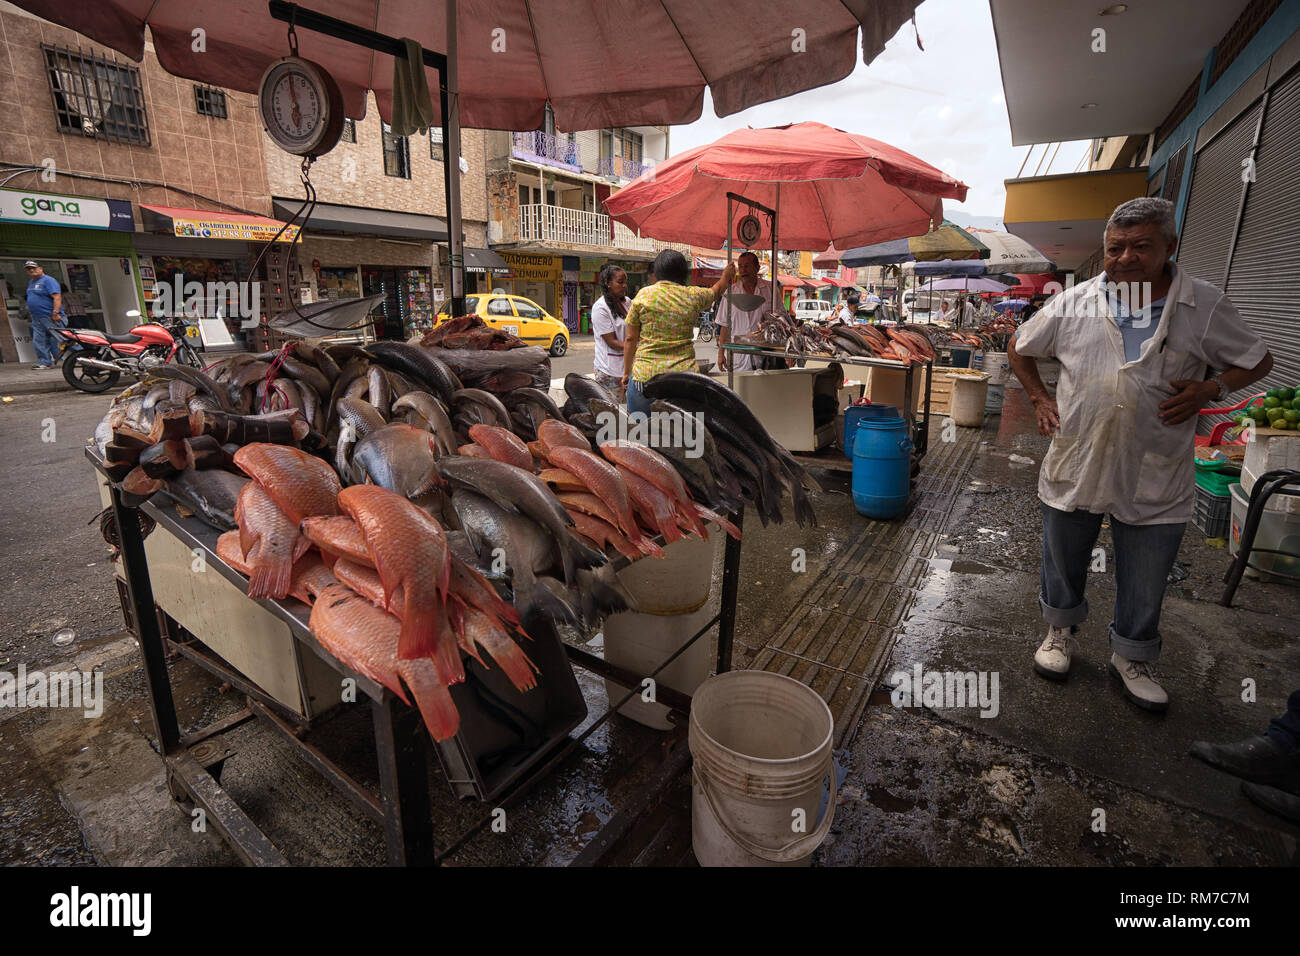 Medellin, Colombia - July 26, 2018: outdoor fish market in the Prado area of the city Stock Photo